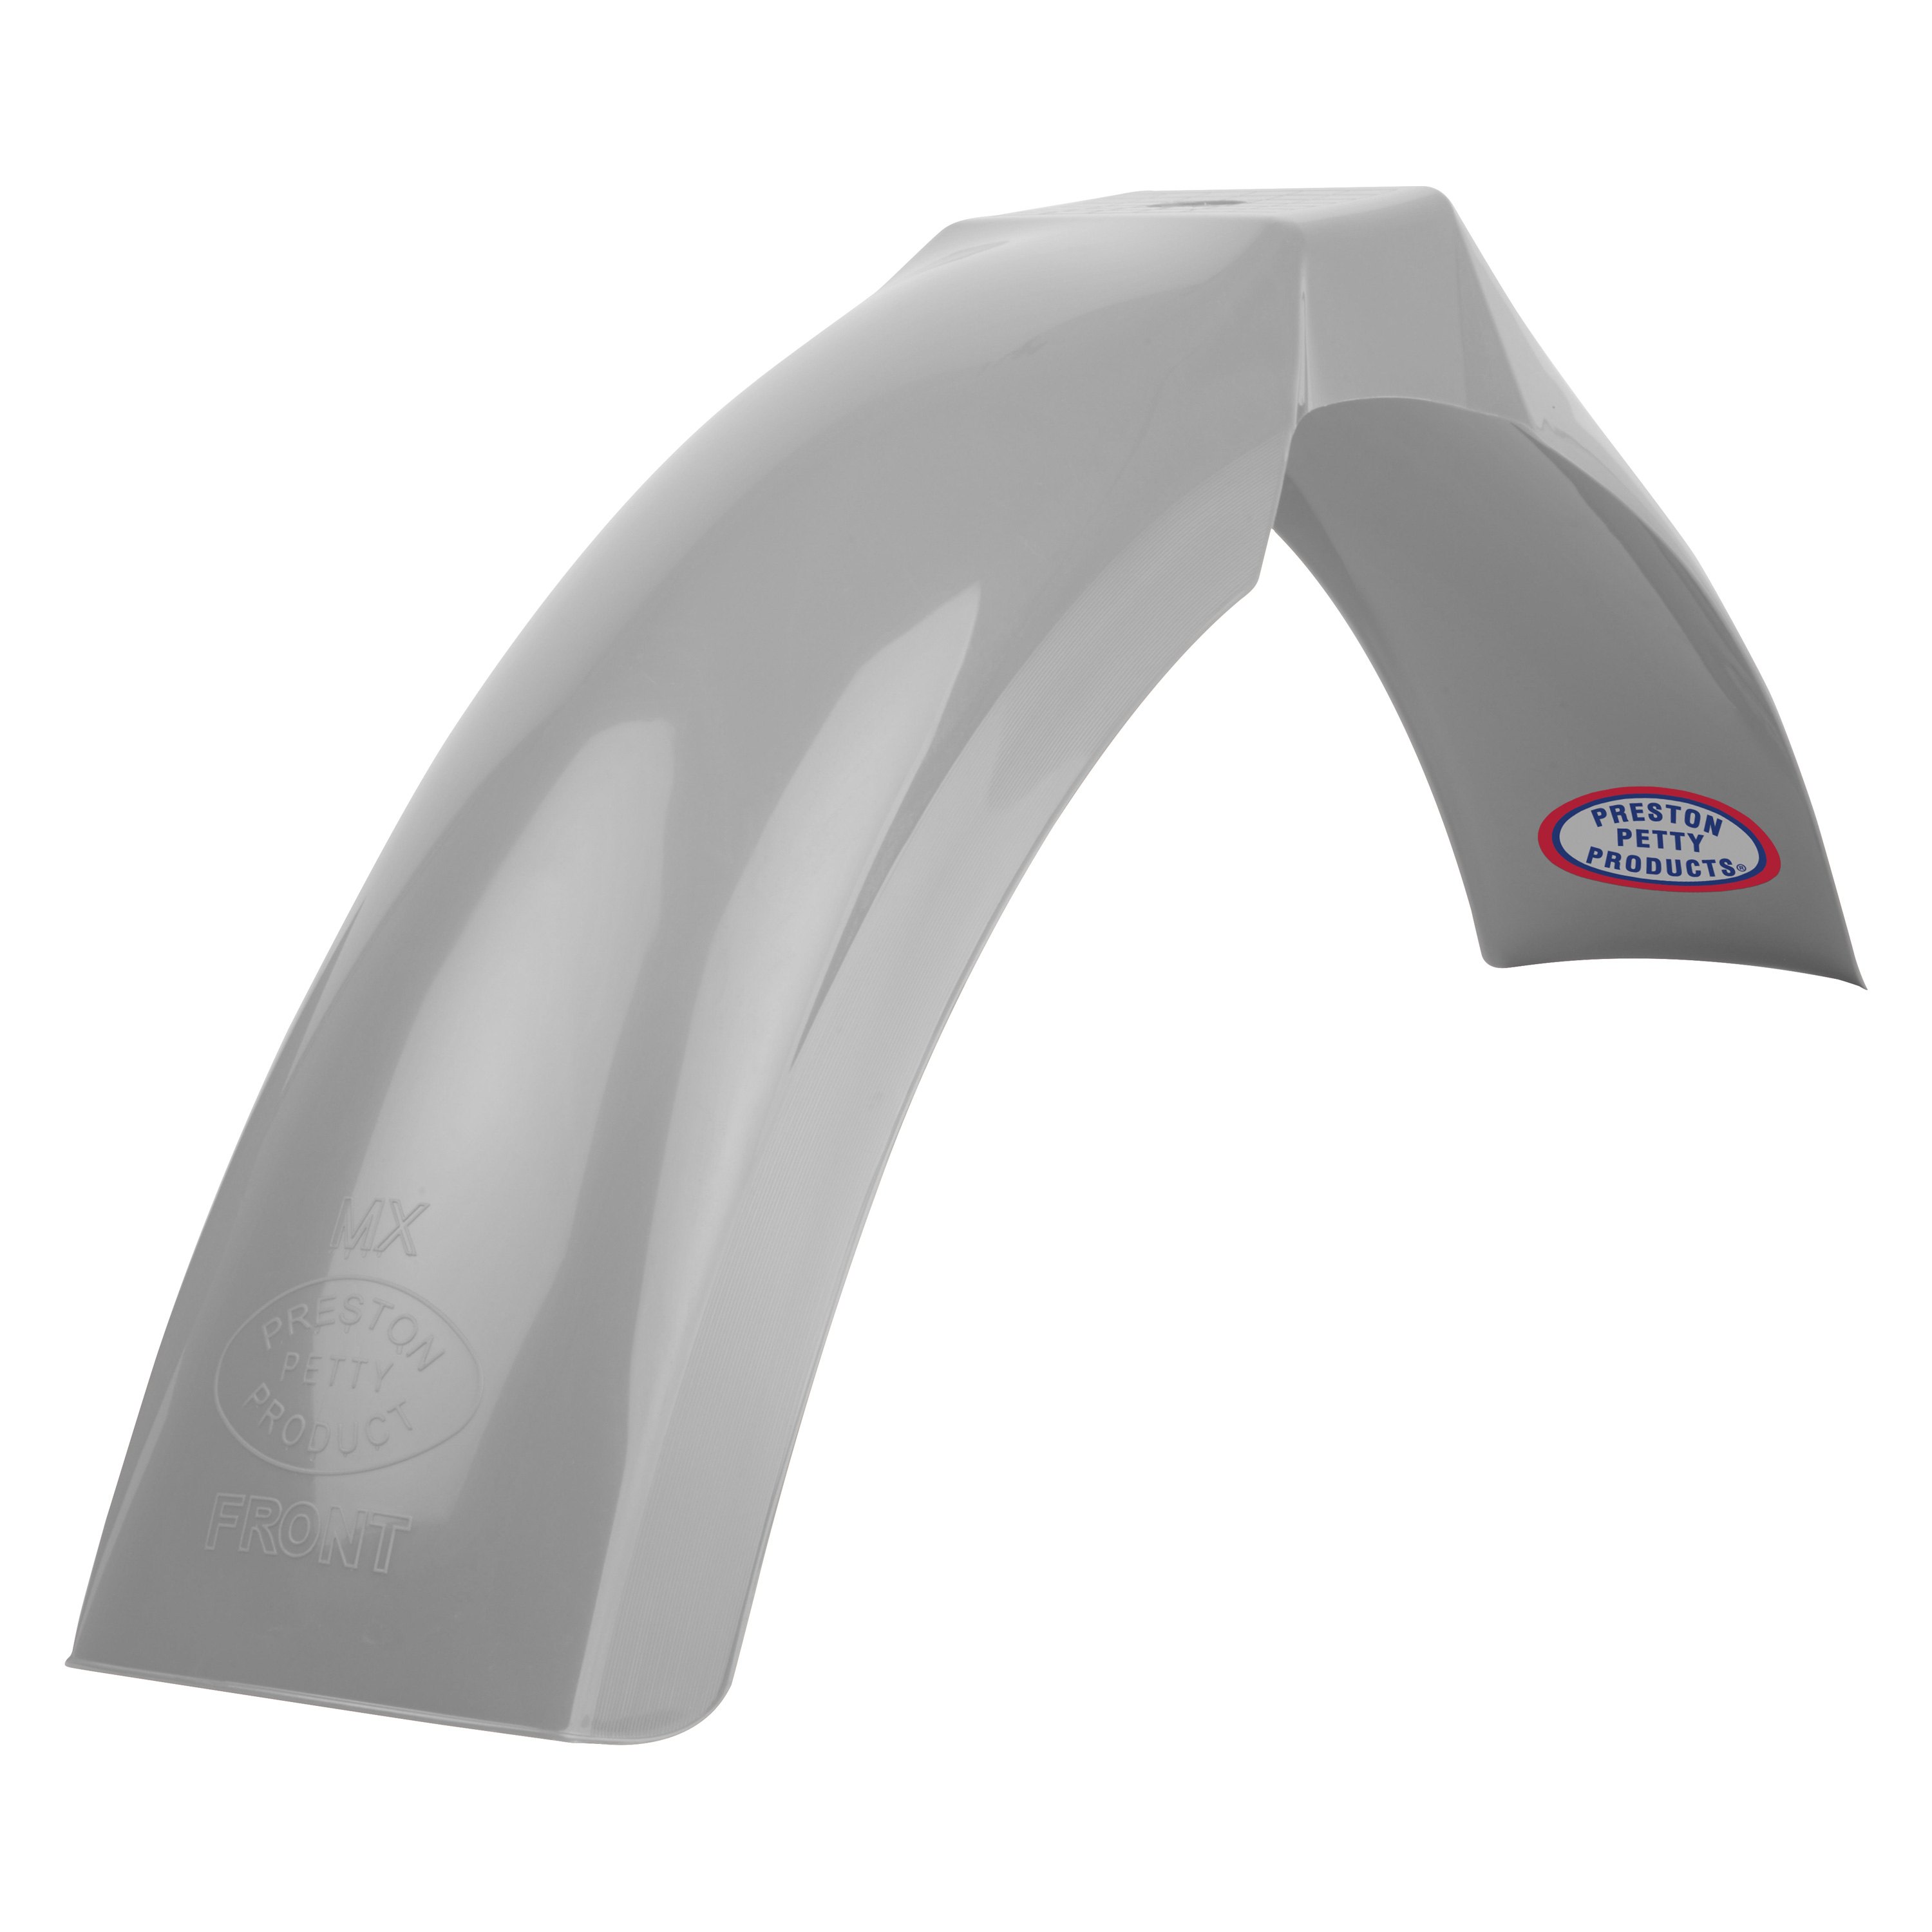 Front and Rear MX Fender Bundle Authentic Preston Petty Products White 